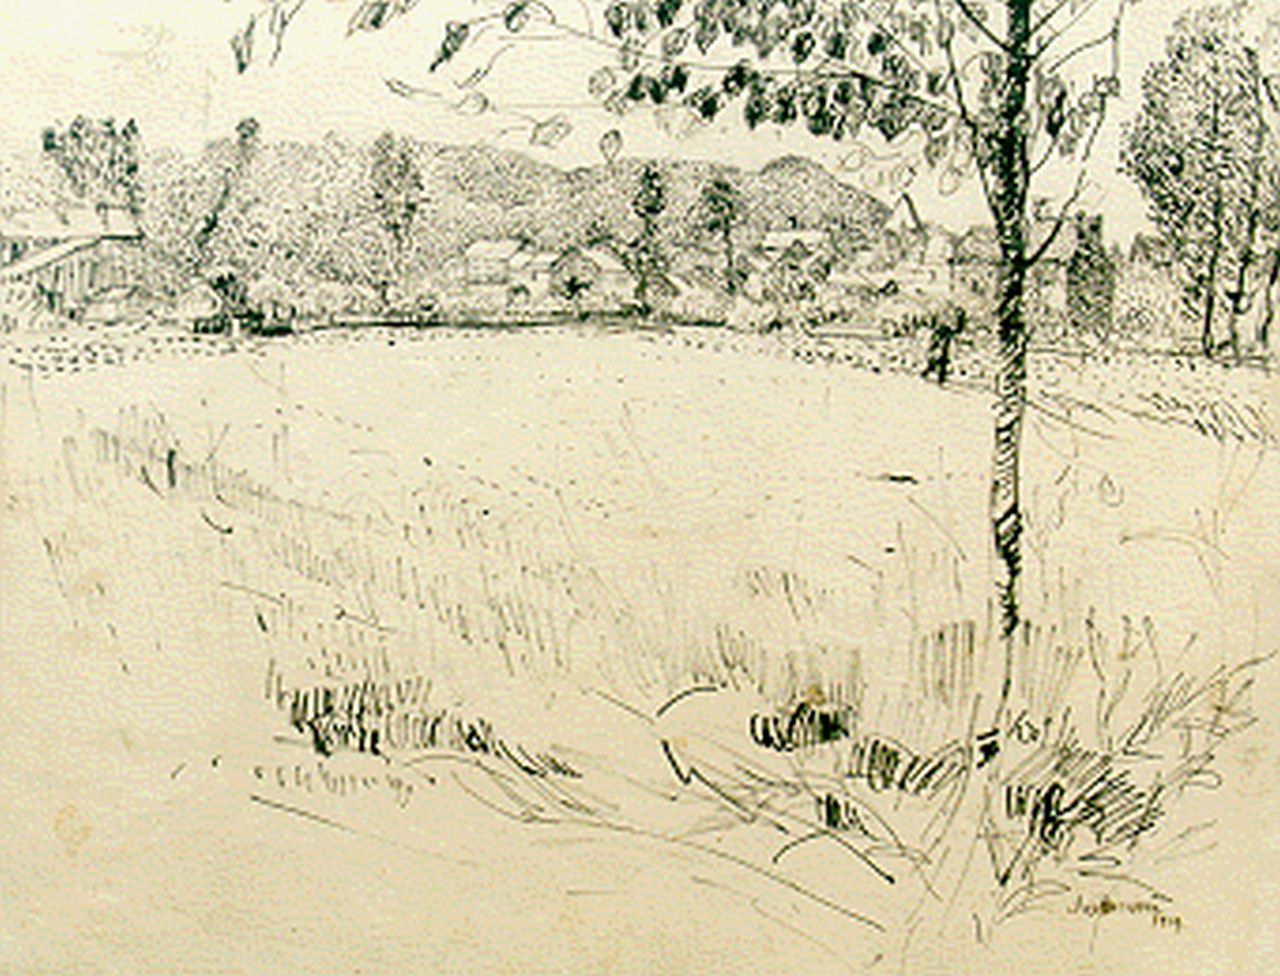 Raphael J.  | Joseph Raphael, Town view, Indian ink on paper 54.0 x 78.8 cm, signed l.r. and dated 1914